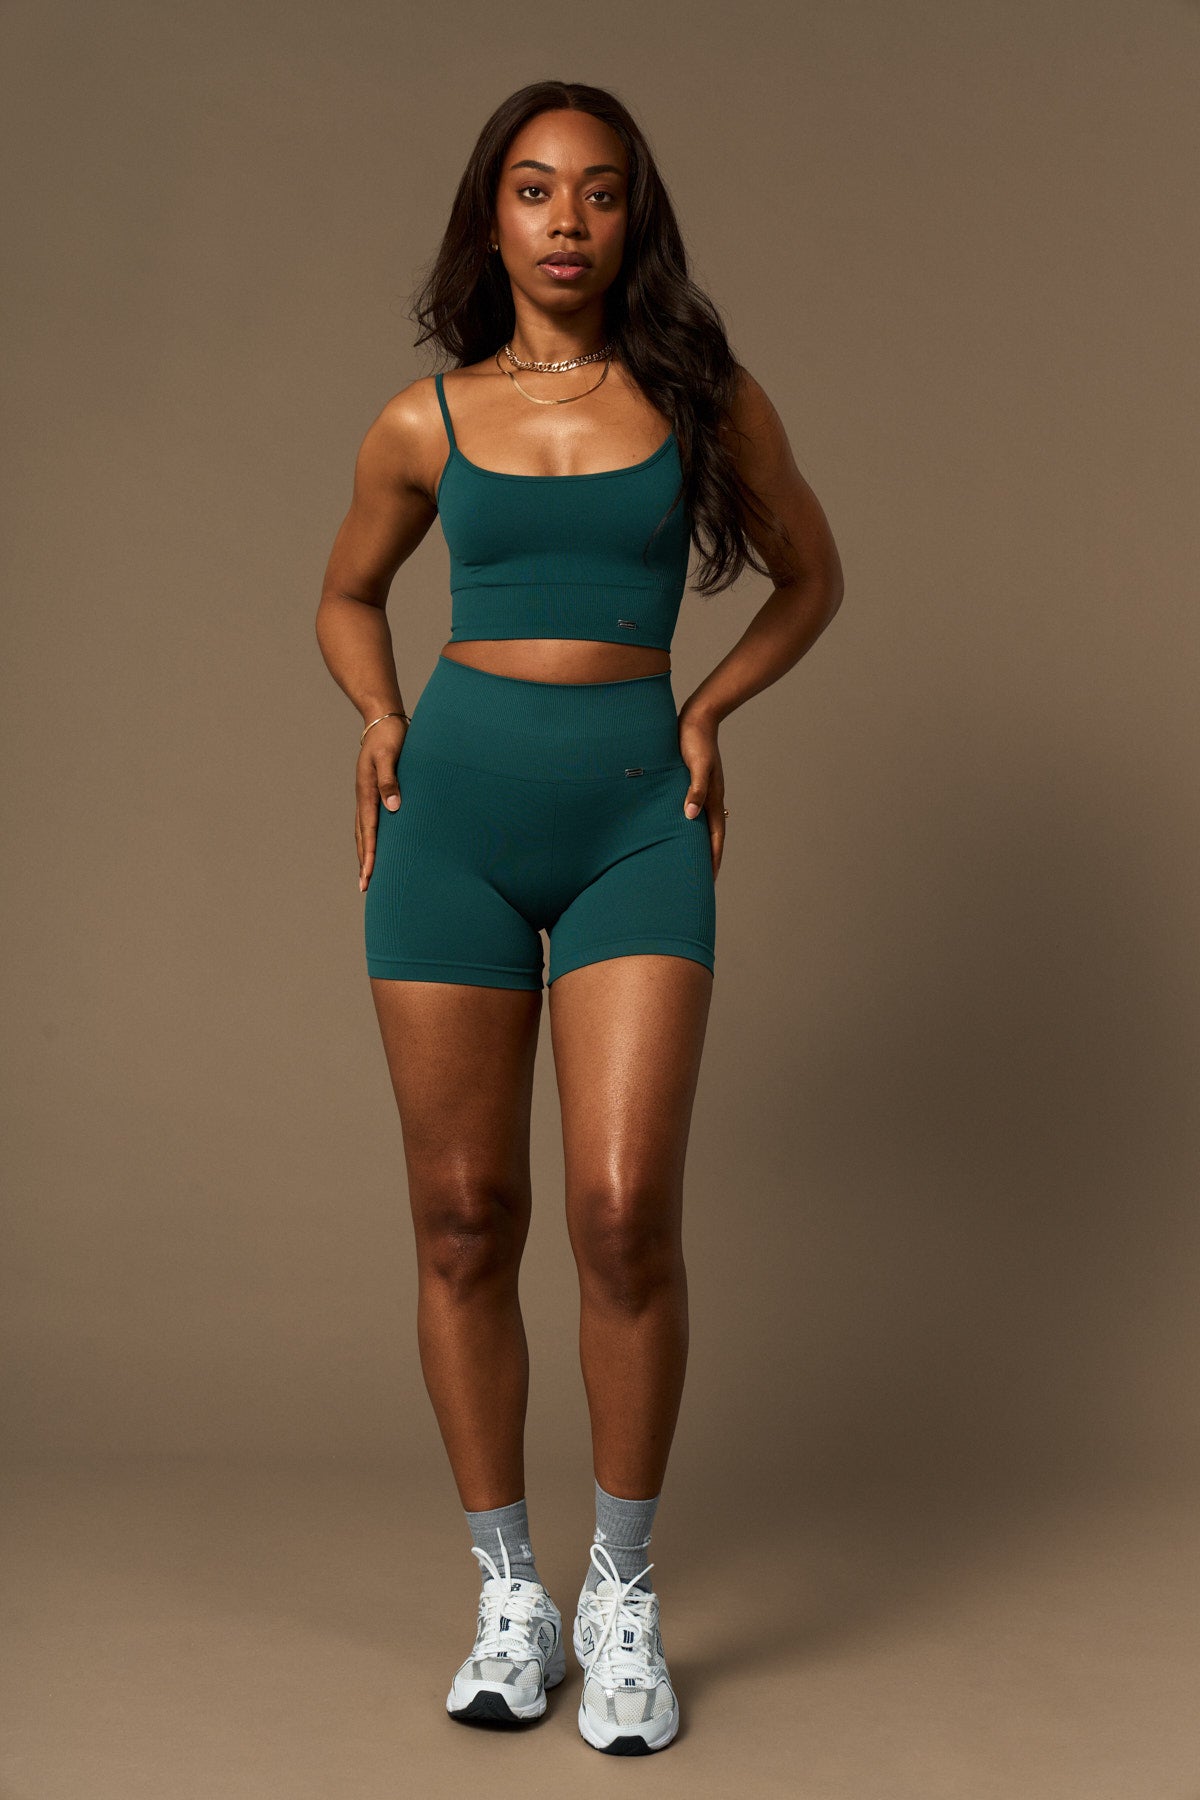 Bliss Short en Pine-Shorts-Shop Clothing Leggings Sustainable Recycled Yoga Clothes Women On-line Barcelona Believe Athletics Sustainable Recycled Yoga Clothes